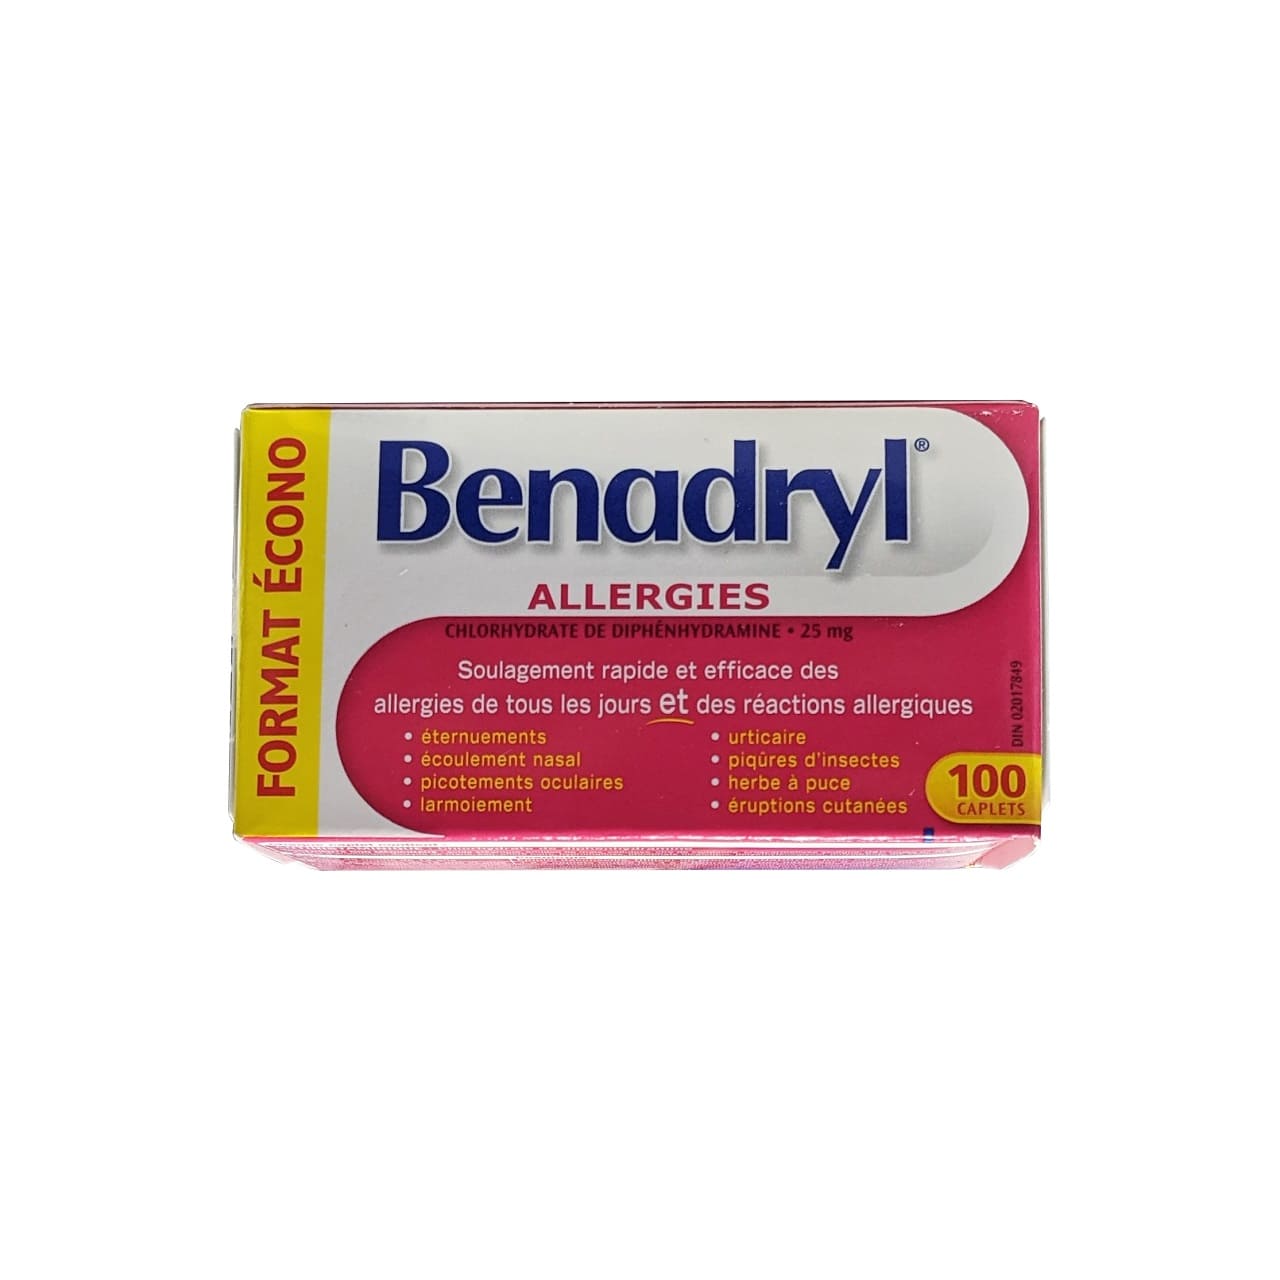 Product label for Benadryl Allergy Caplets Diphenhydramine Hydrochloride 25 mg (100 caplets) in French